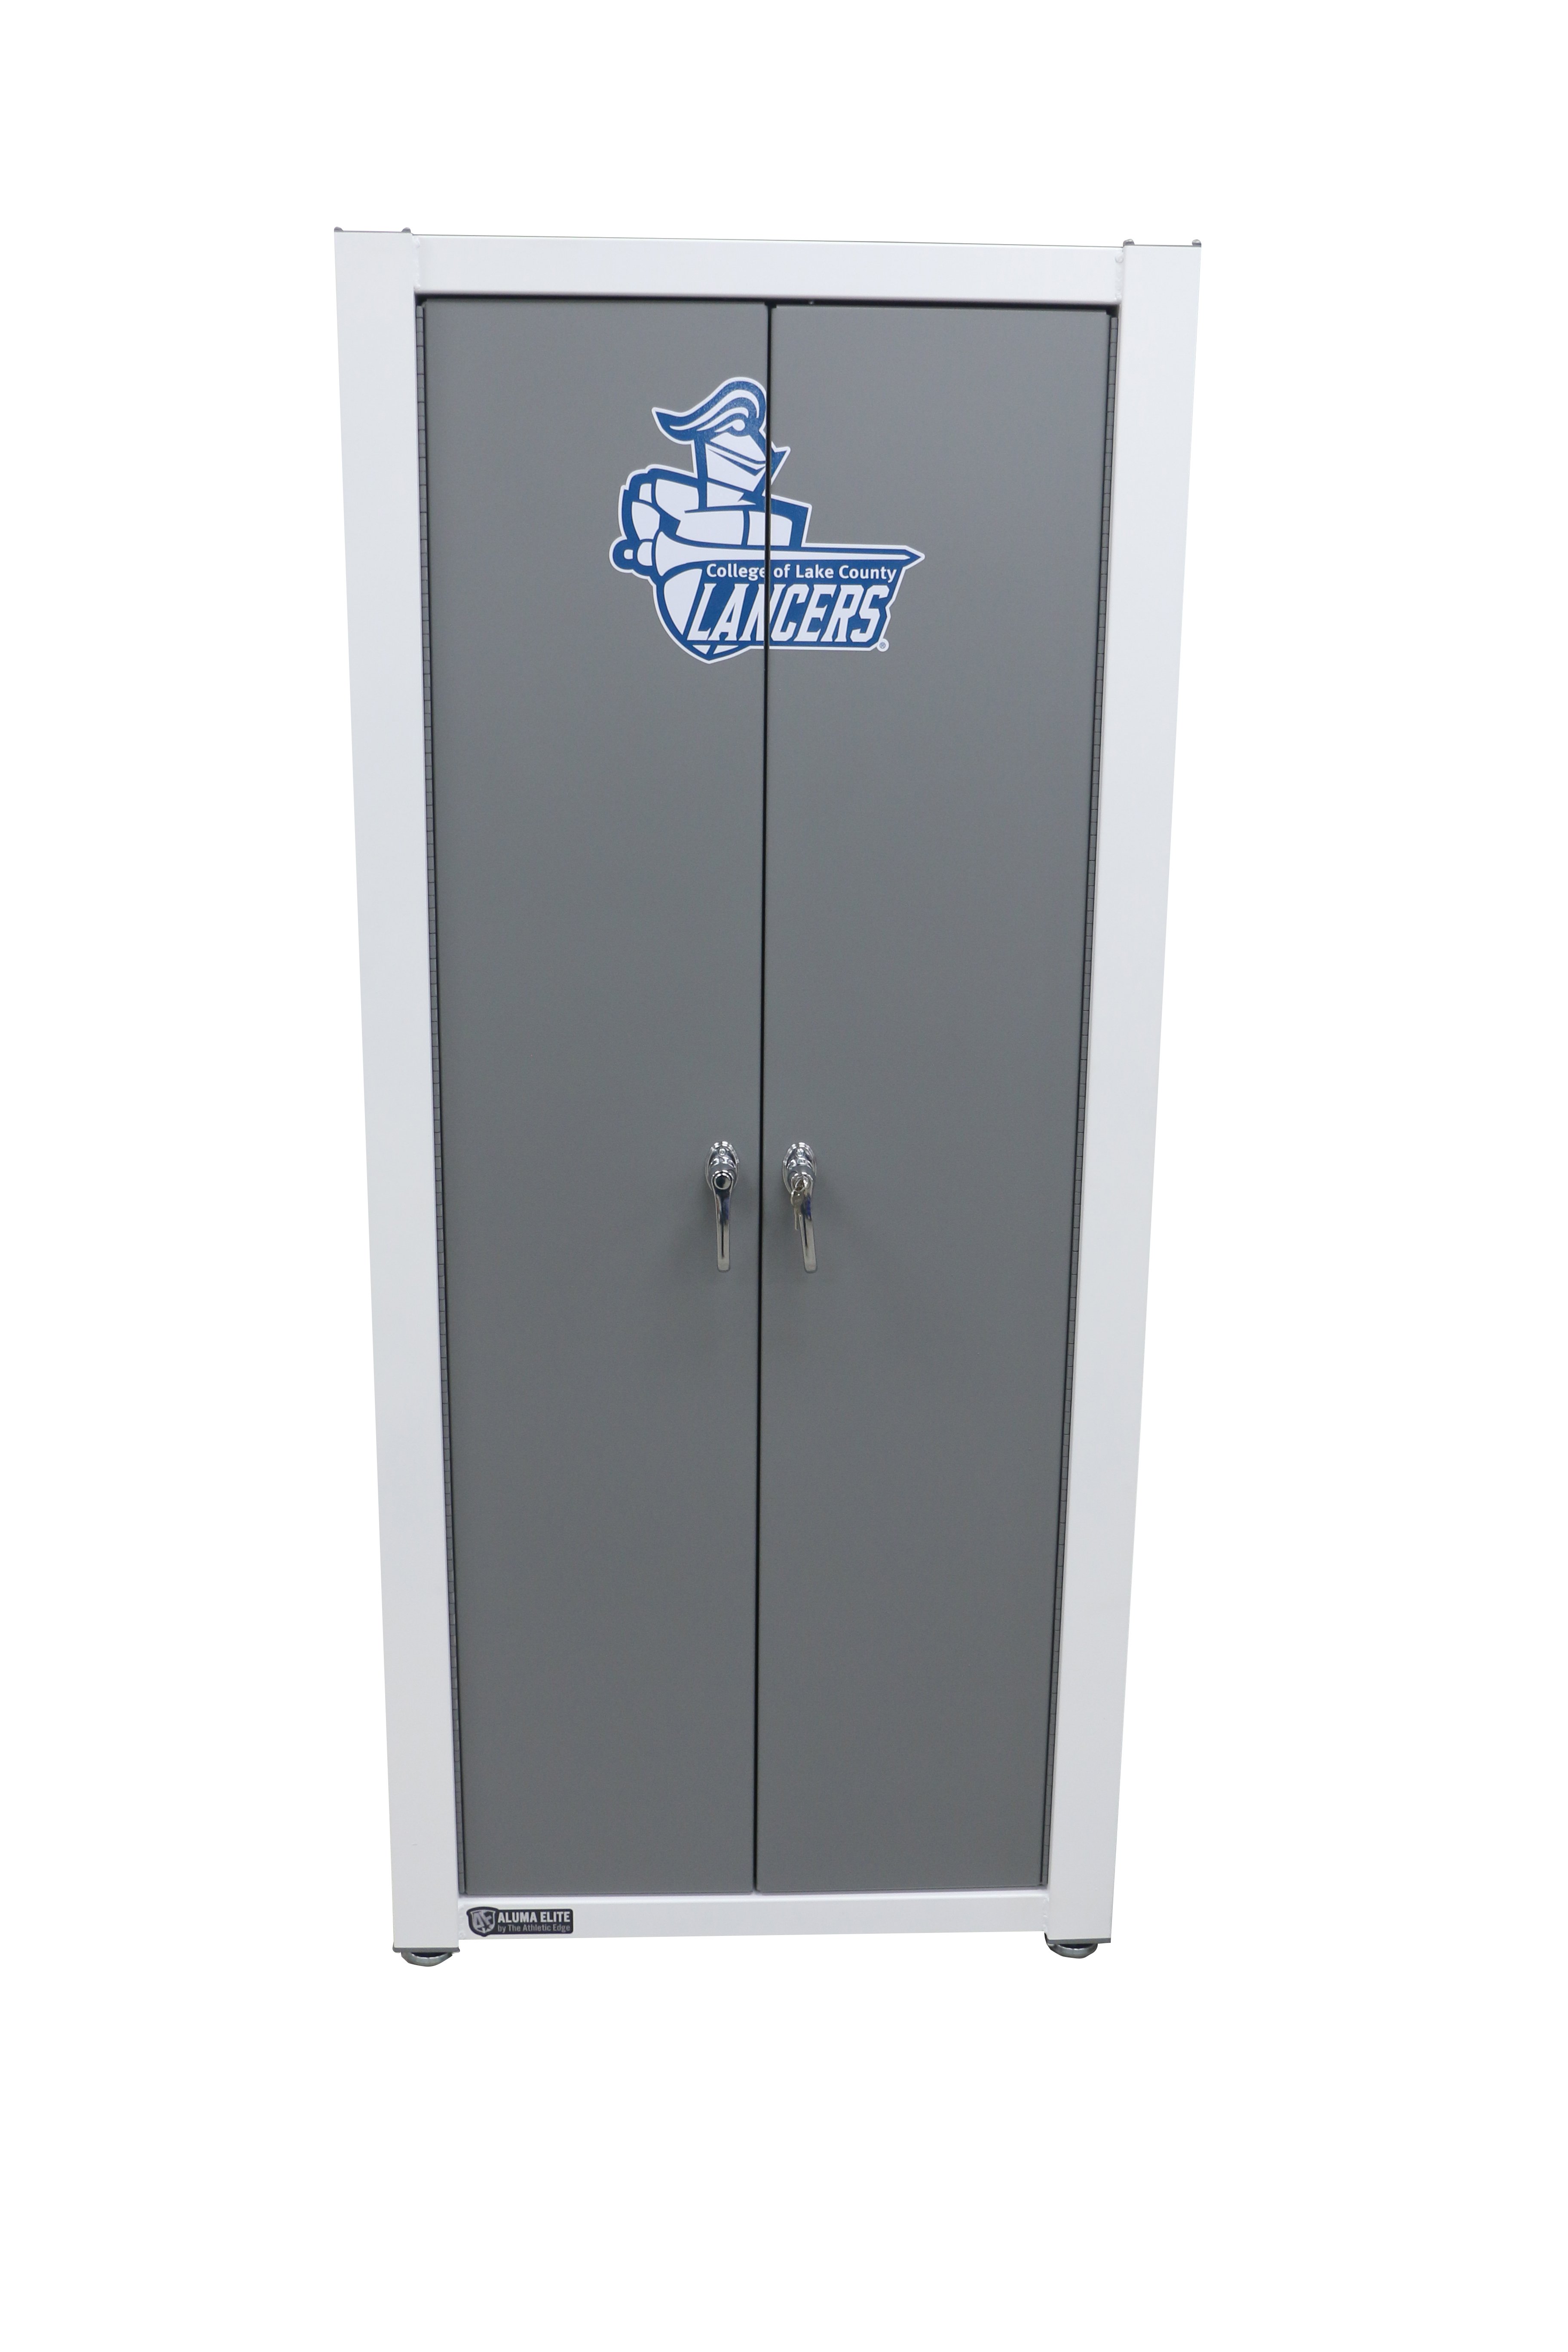 College of Lake County-(Stationary Cabinet)